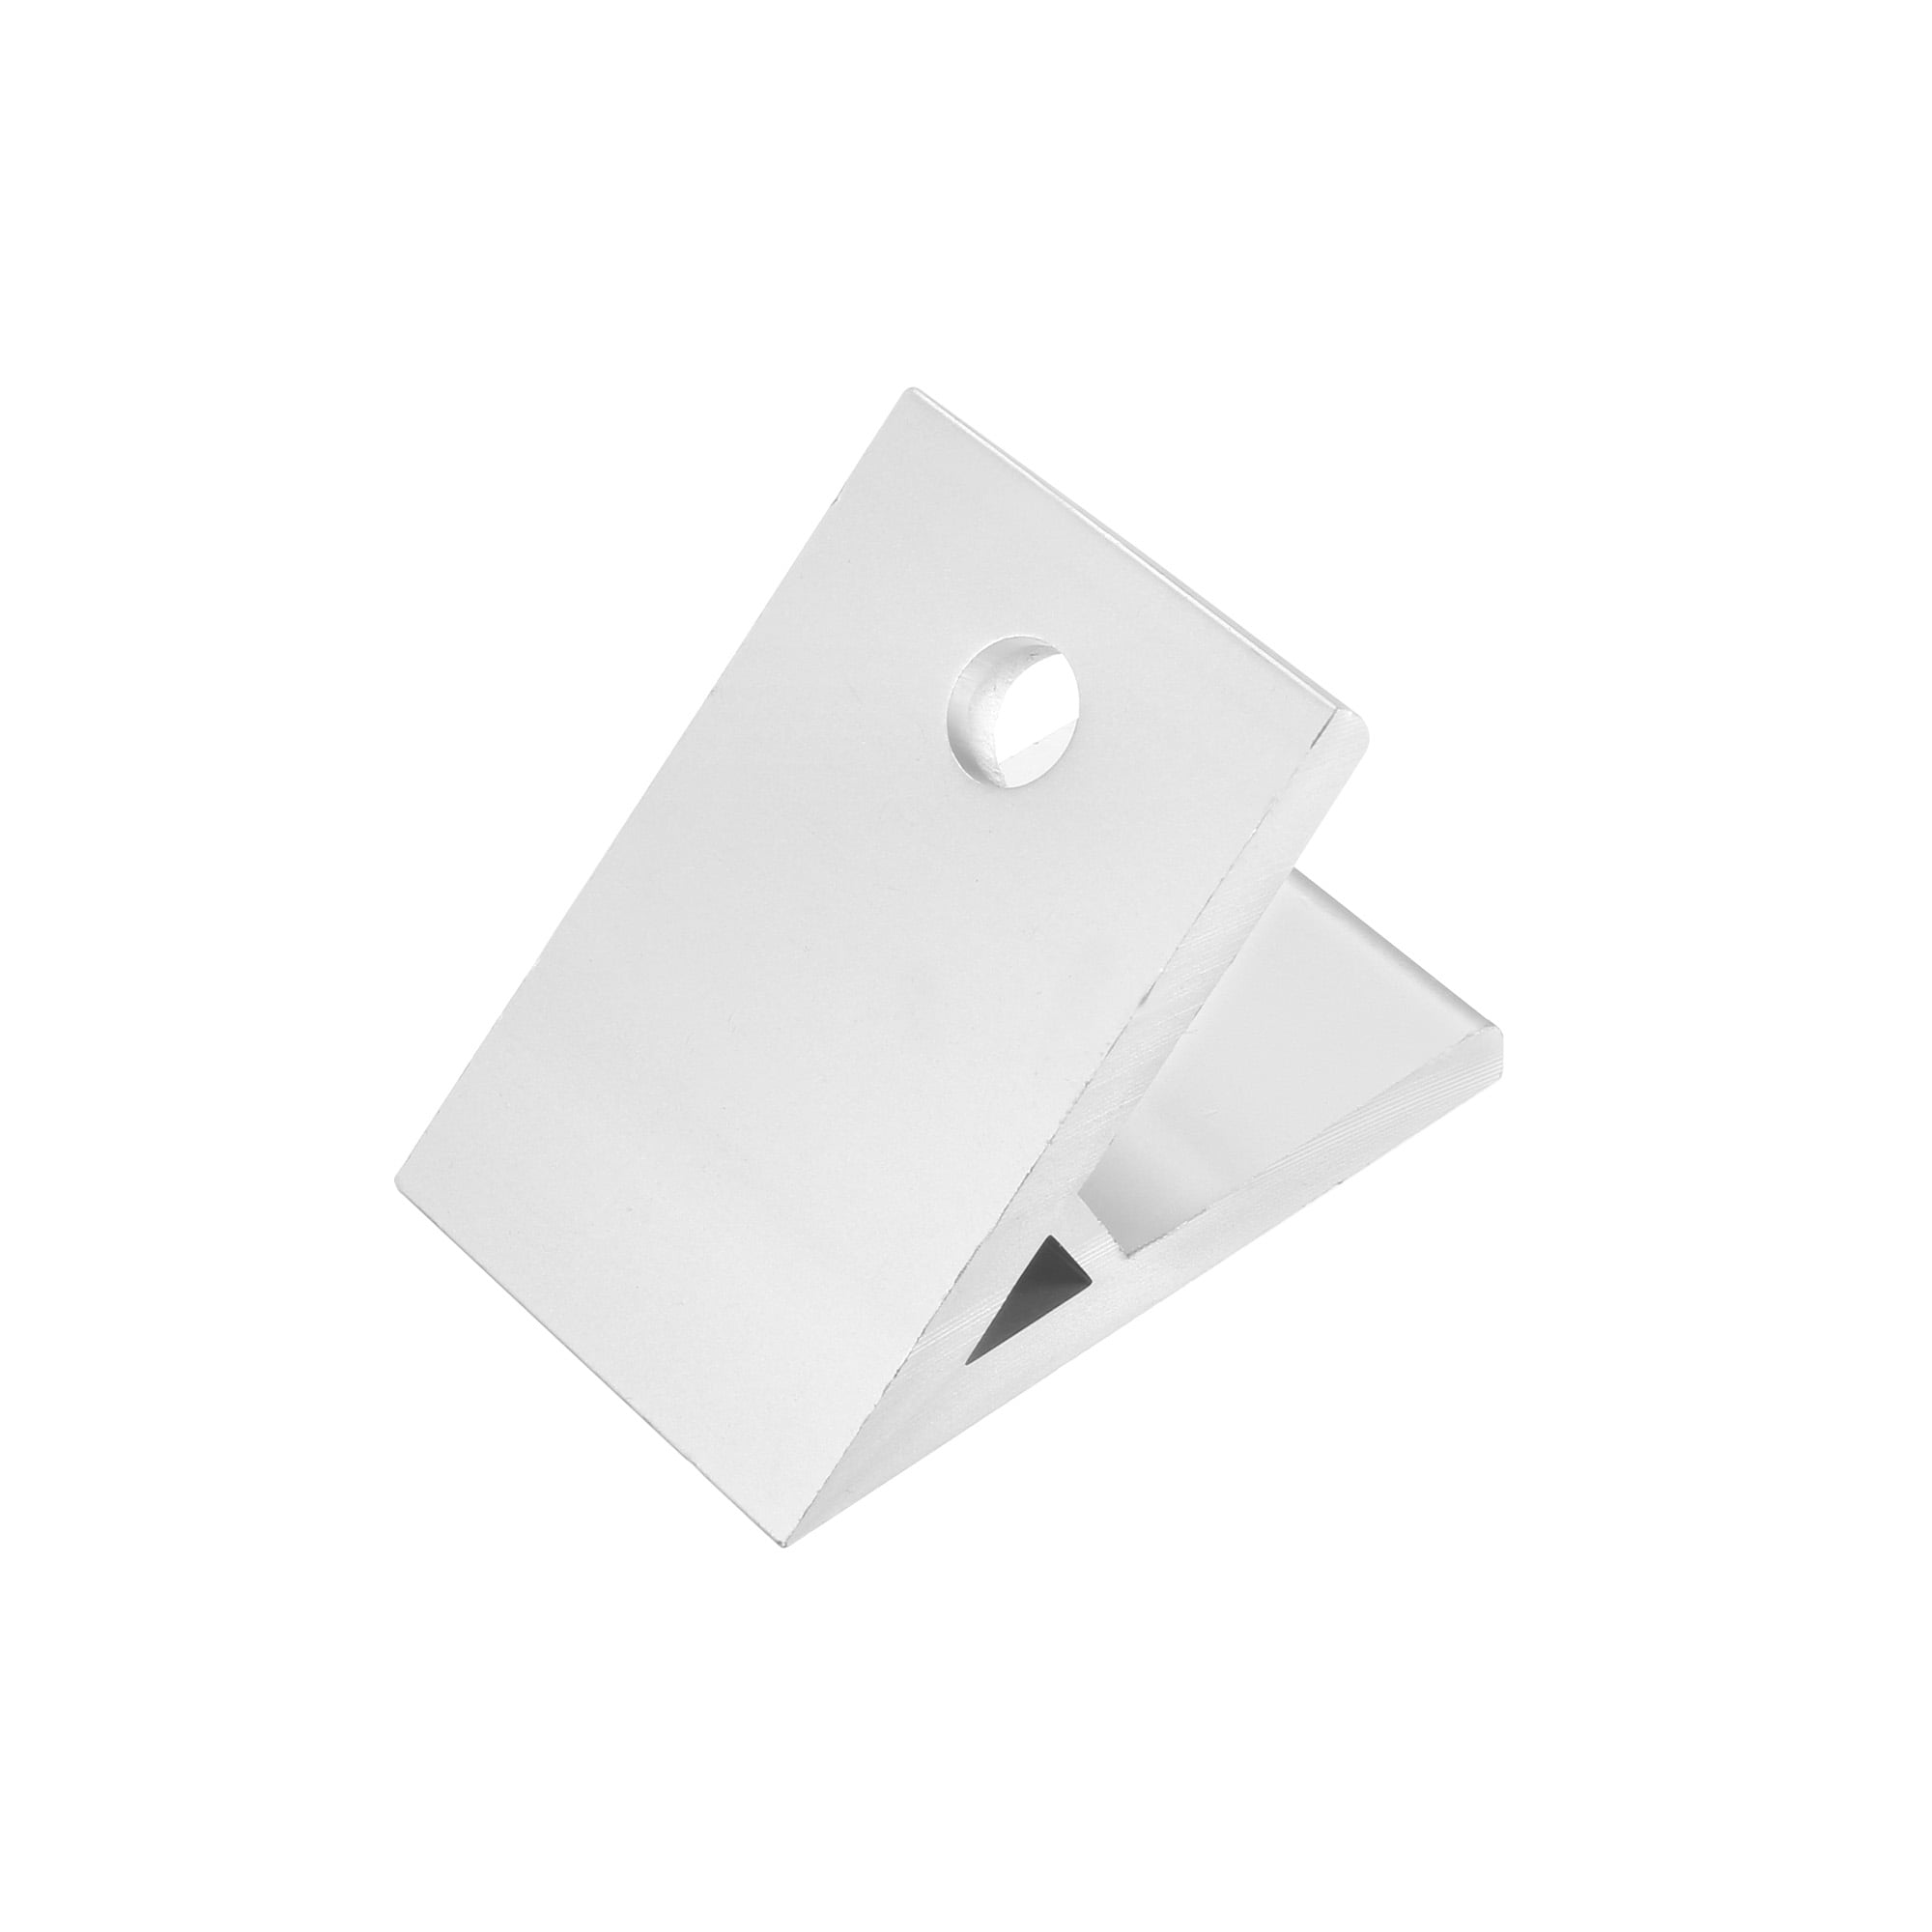 32mm MIRROR CORNER MOUNTING BRACKETS FOR GLASS OR BOARD UP TO 6mm THICK PICTURES